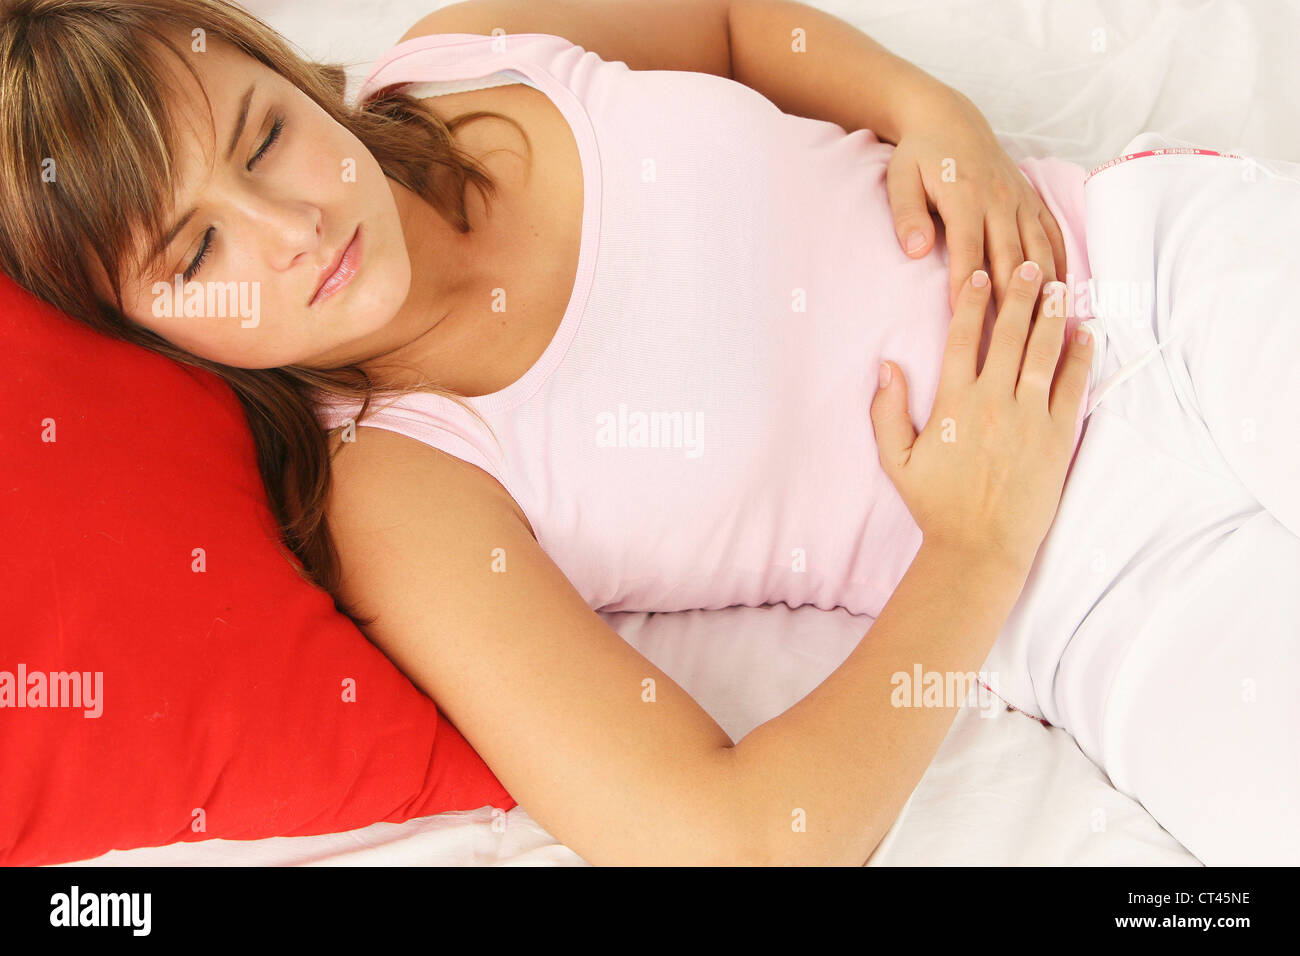 ABDOMINAL PAIN IN A WOMAN Stock Photo